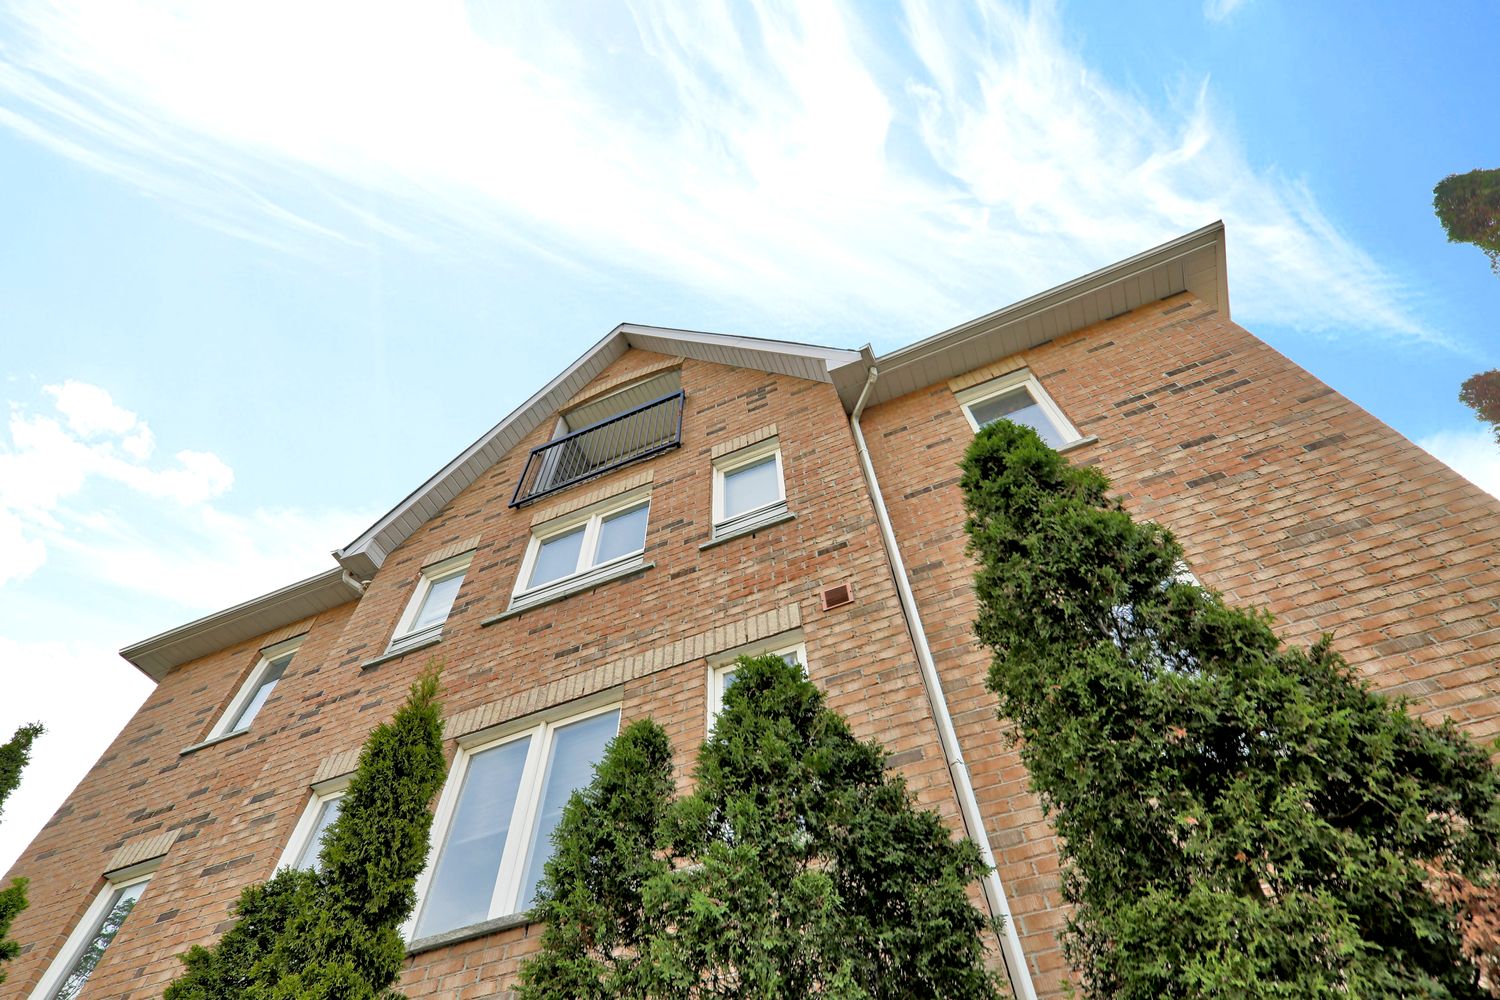 2-22 Leaside Park Drive. Leaside Green Townhomes is located in  East York, Toronto - image #3 of 4